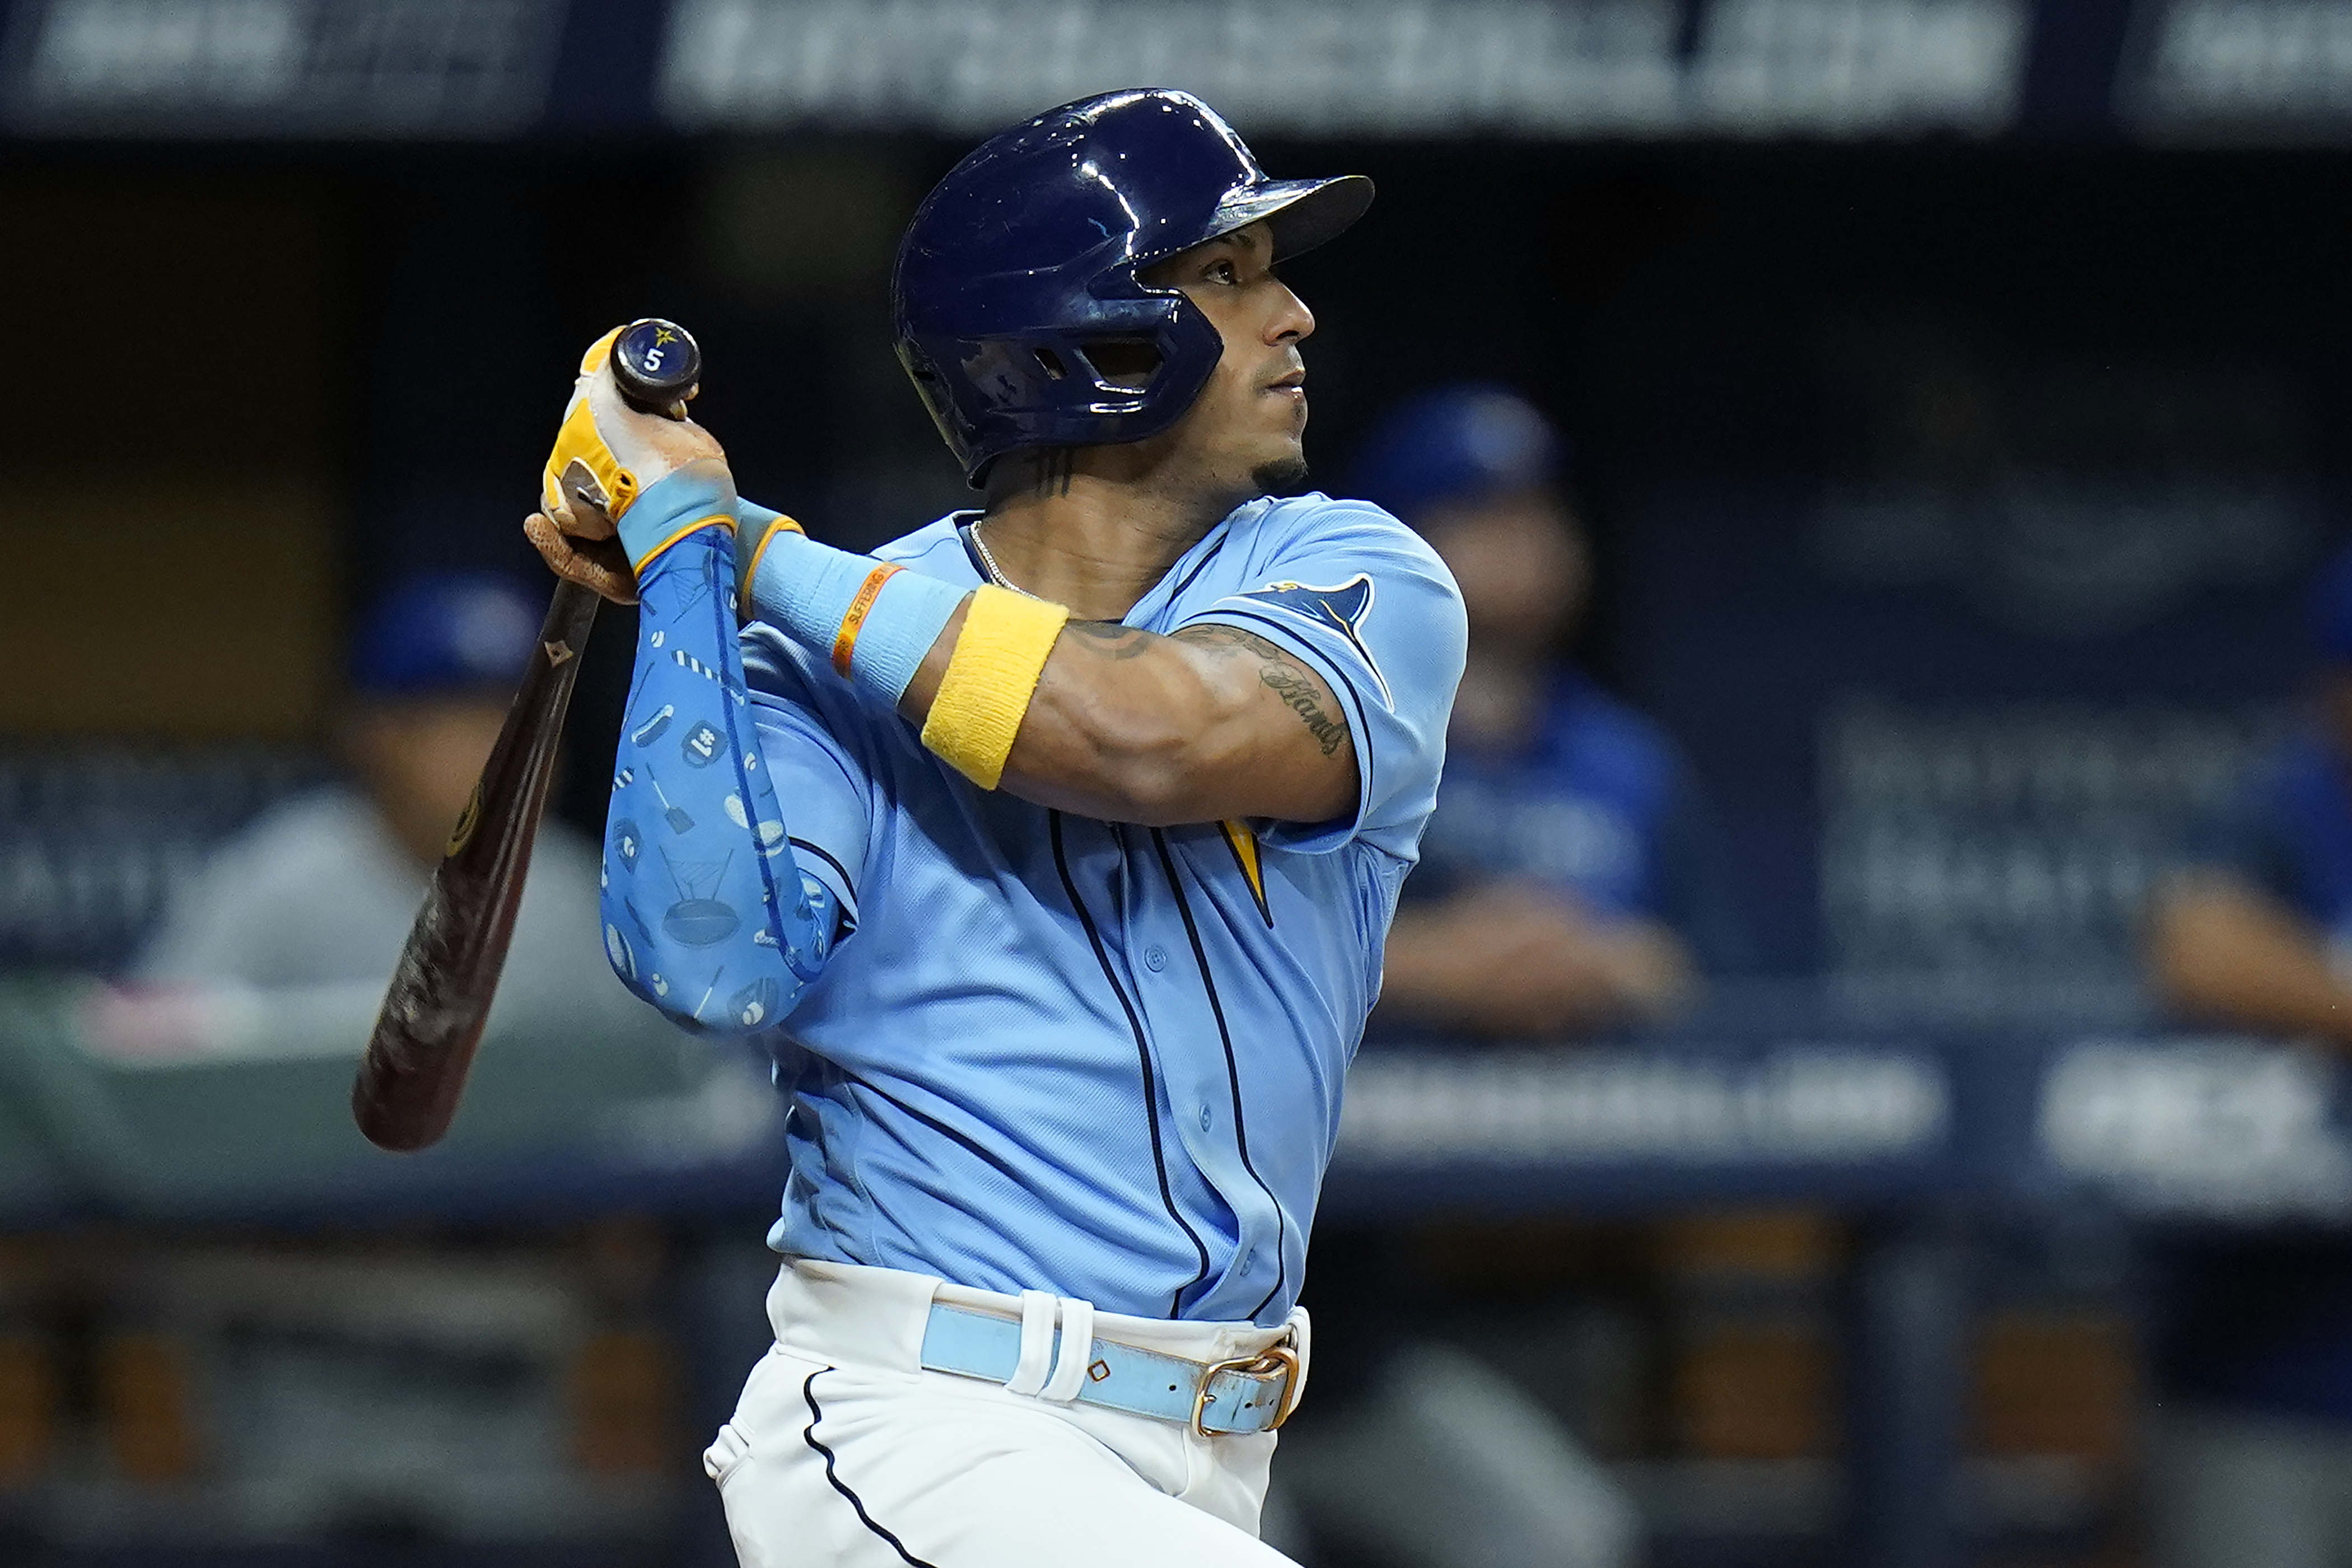 Rays prospects and minor leagues: Lowe brothers homer in Durham